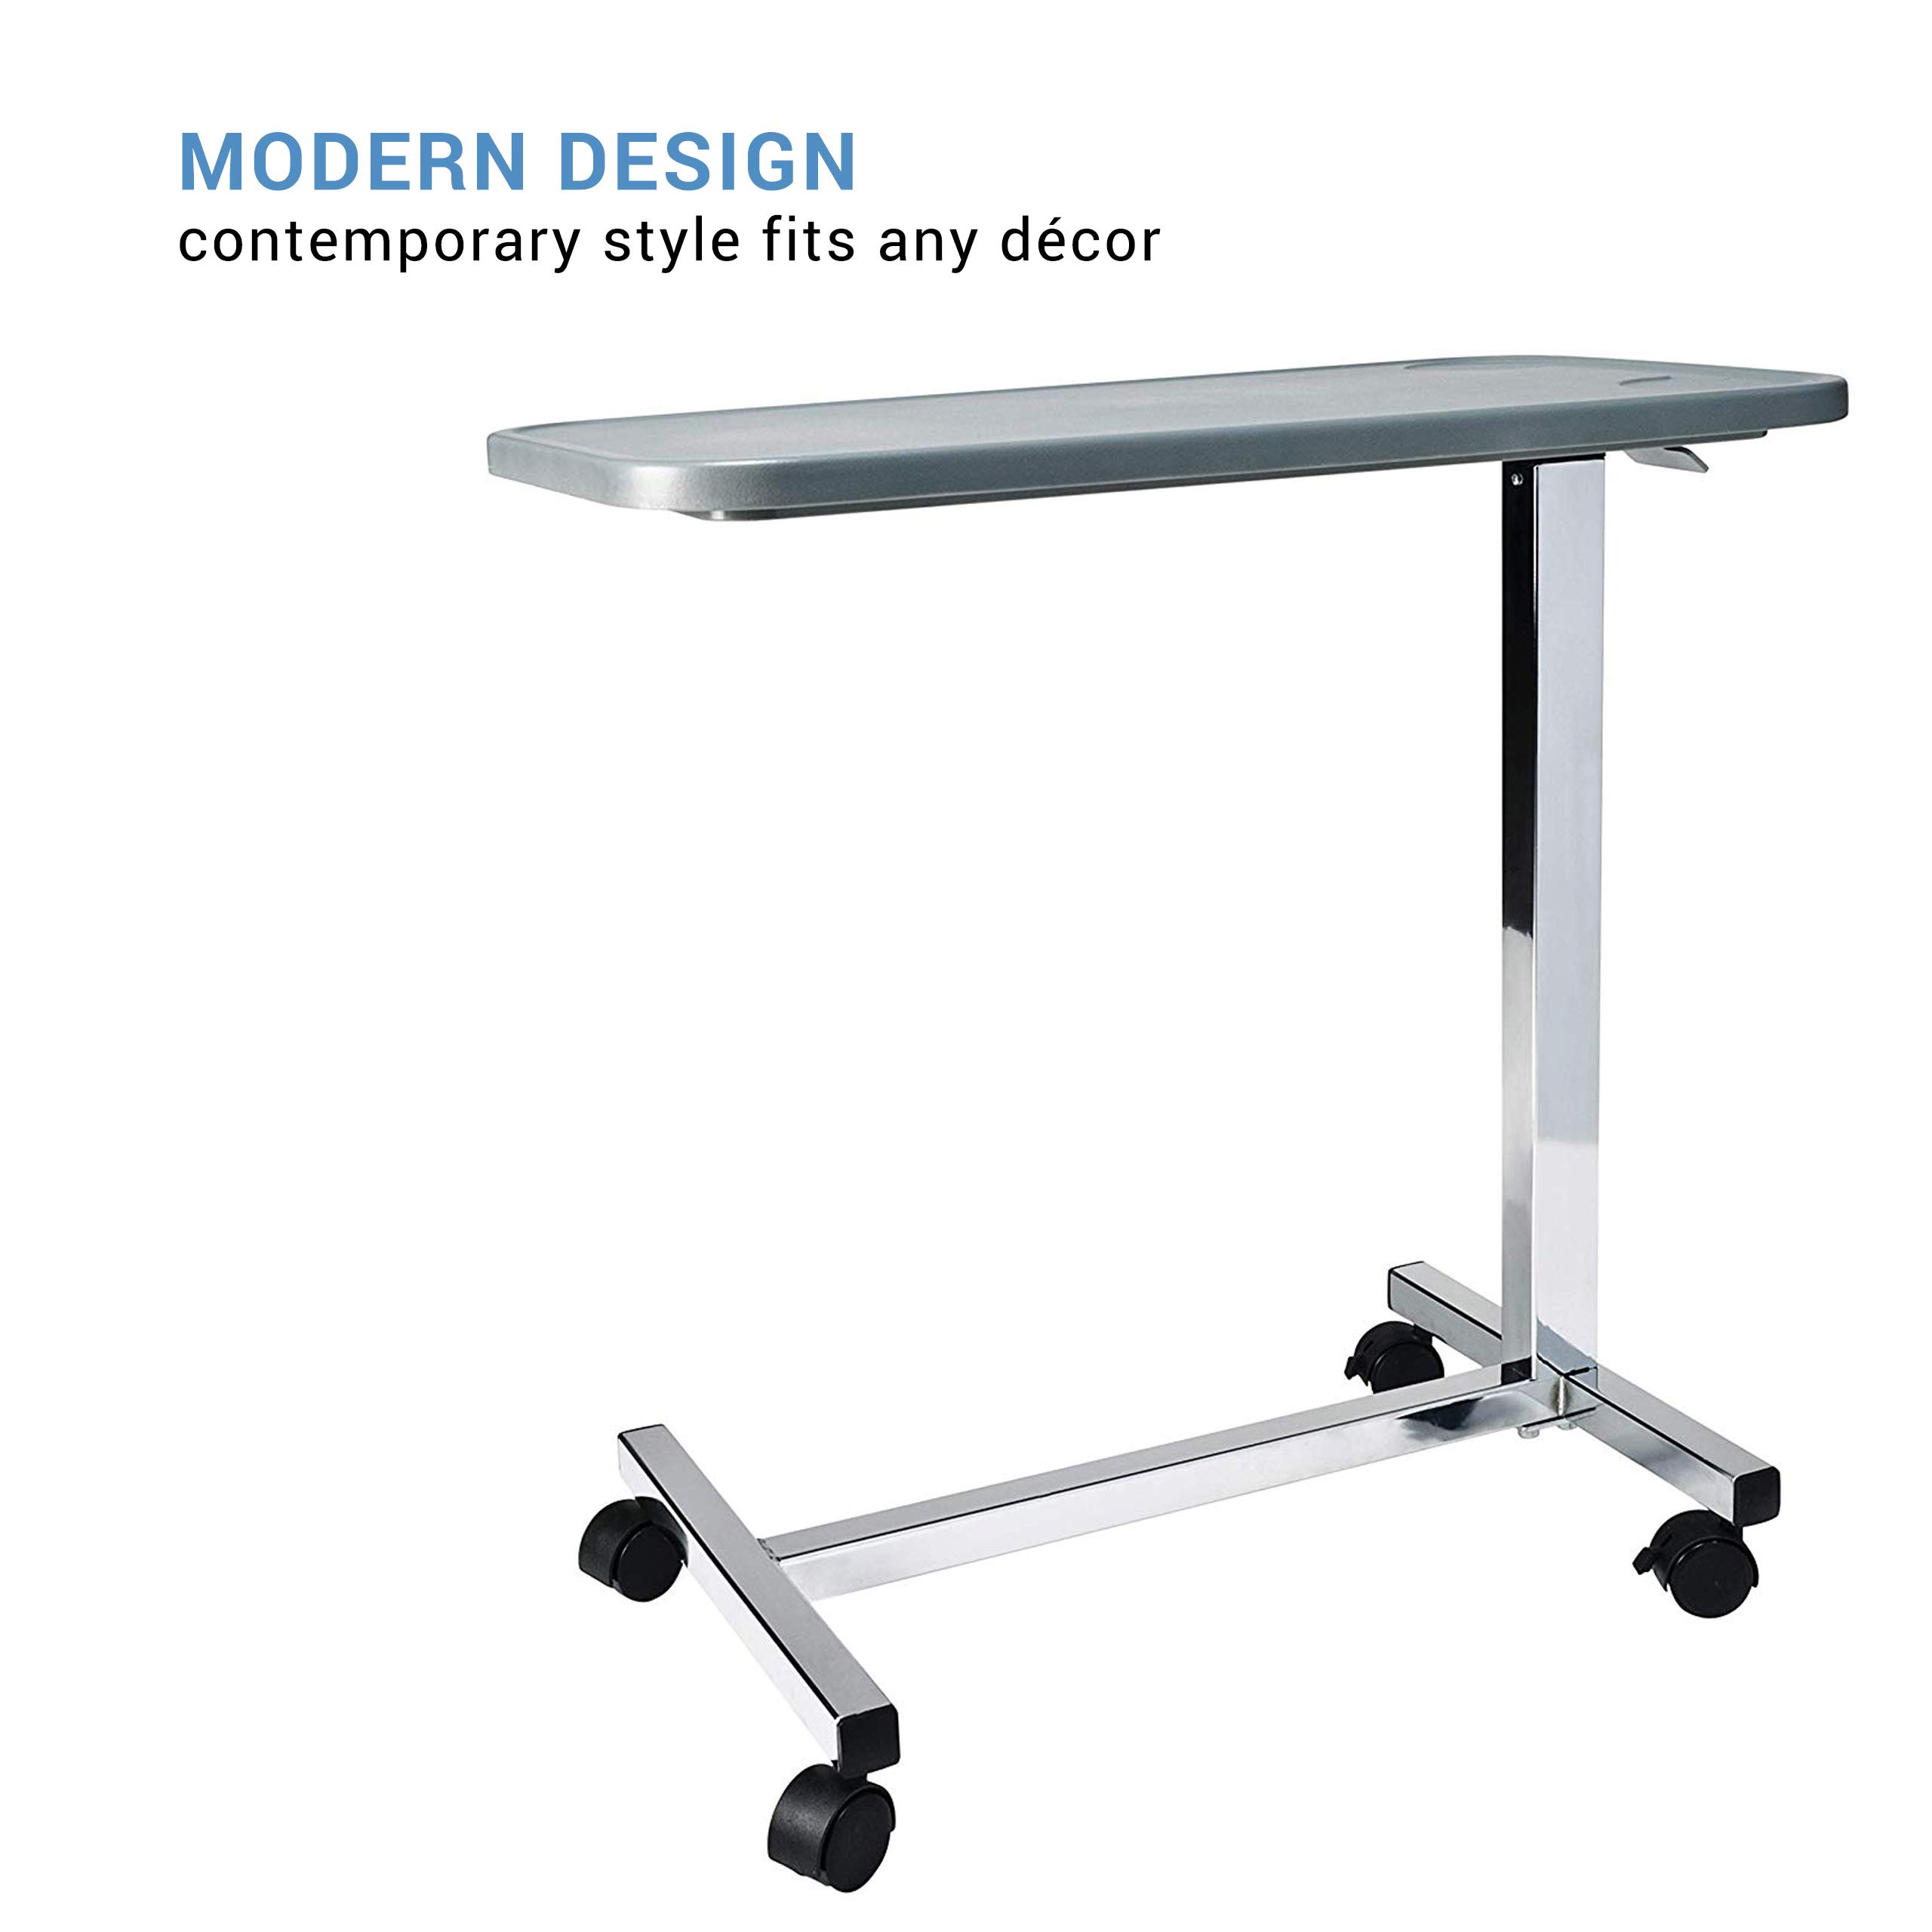 Graham-Field GF8903P Lumex Modern Overbed Table with Wheels, 28-41